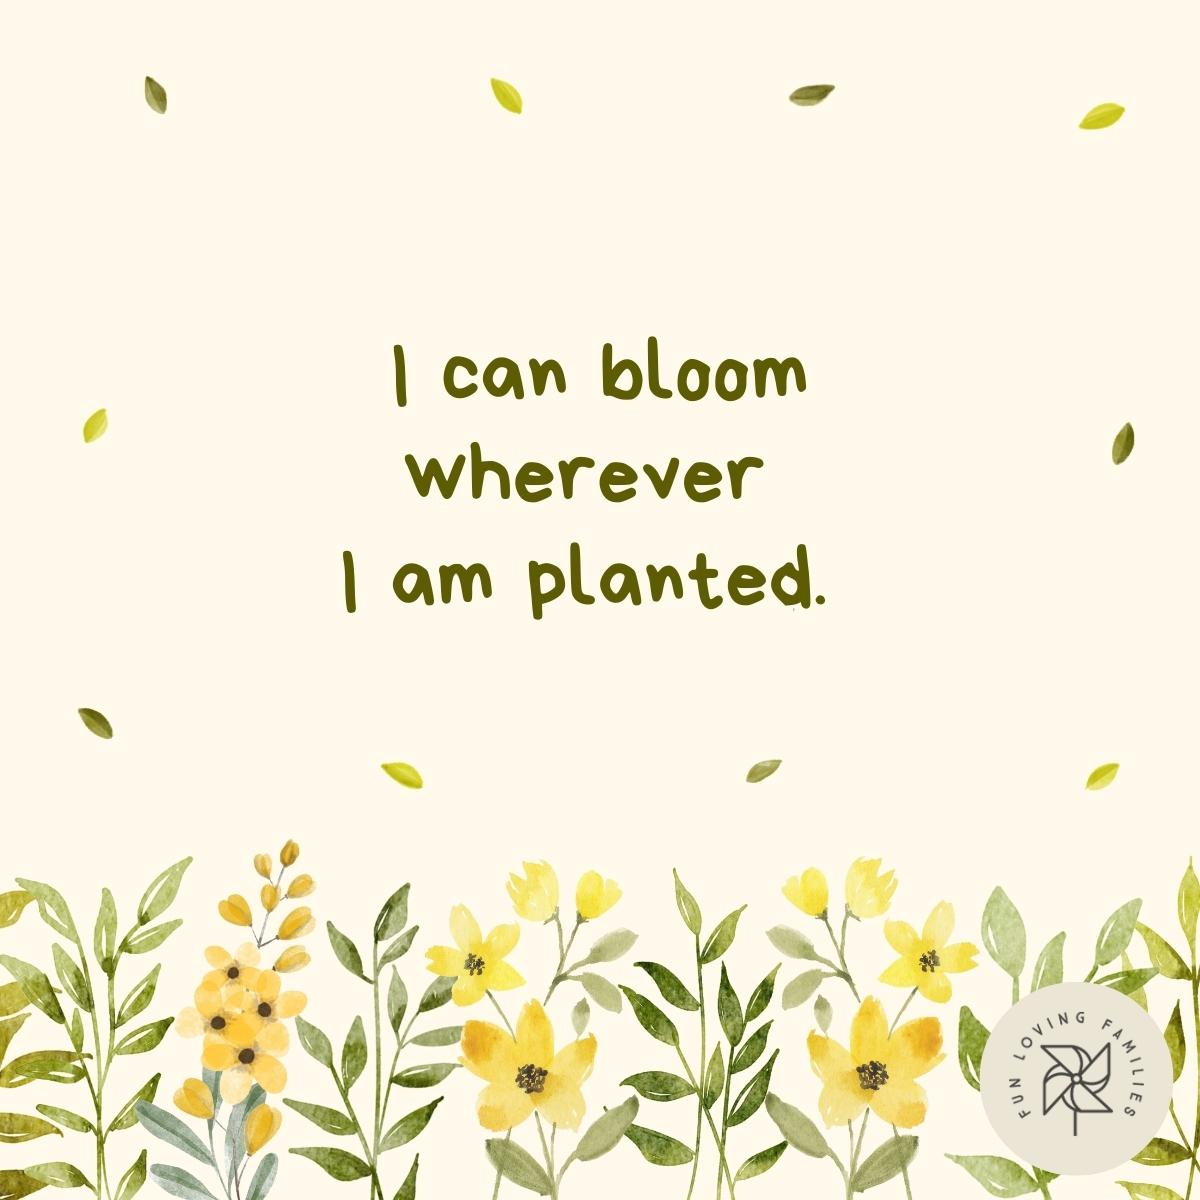 I can bloom wherever I am planted affirmation